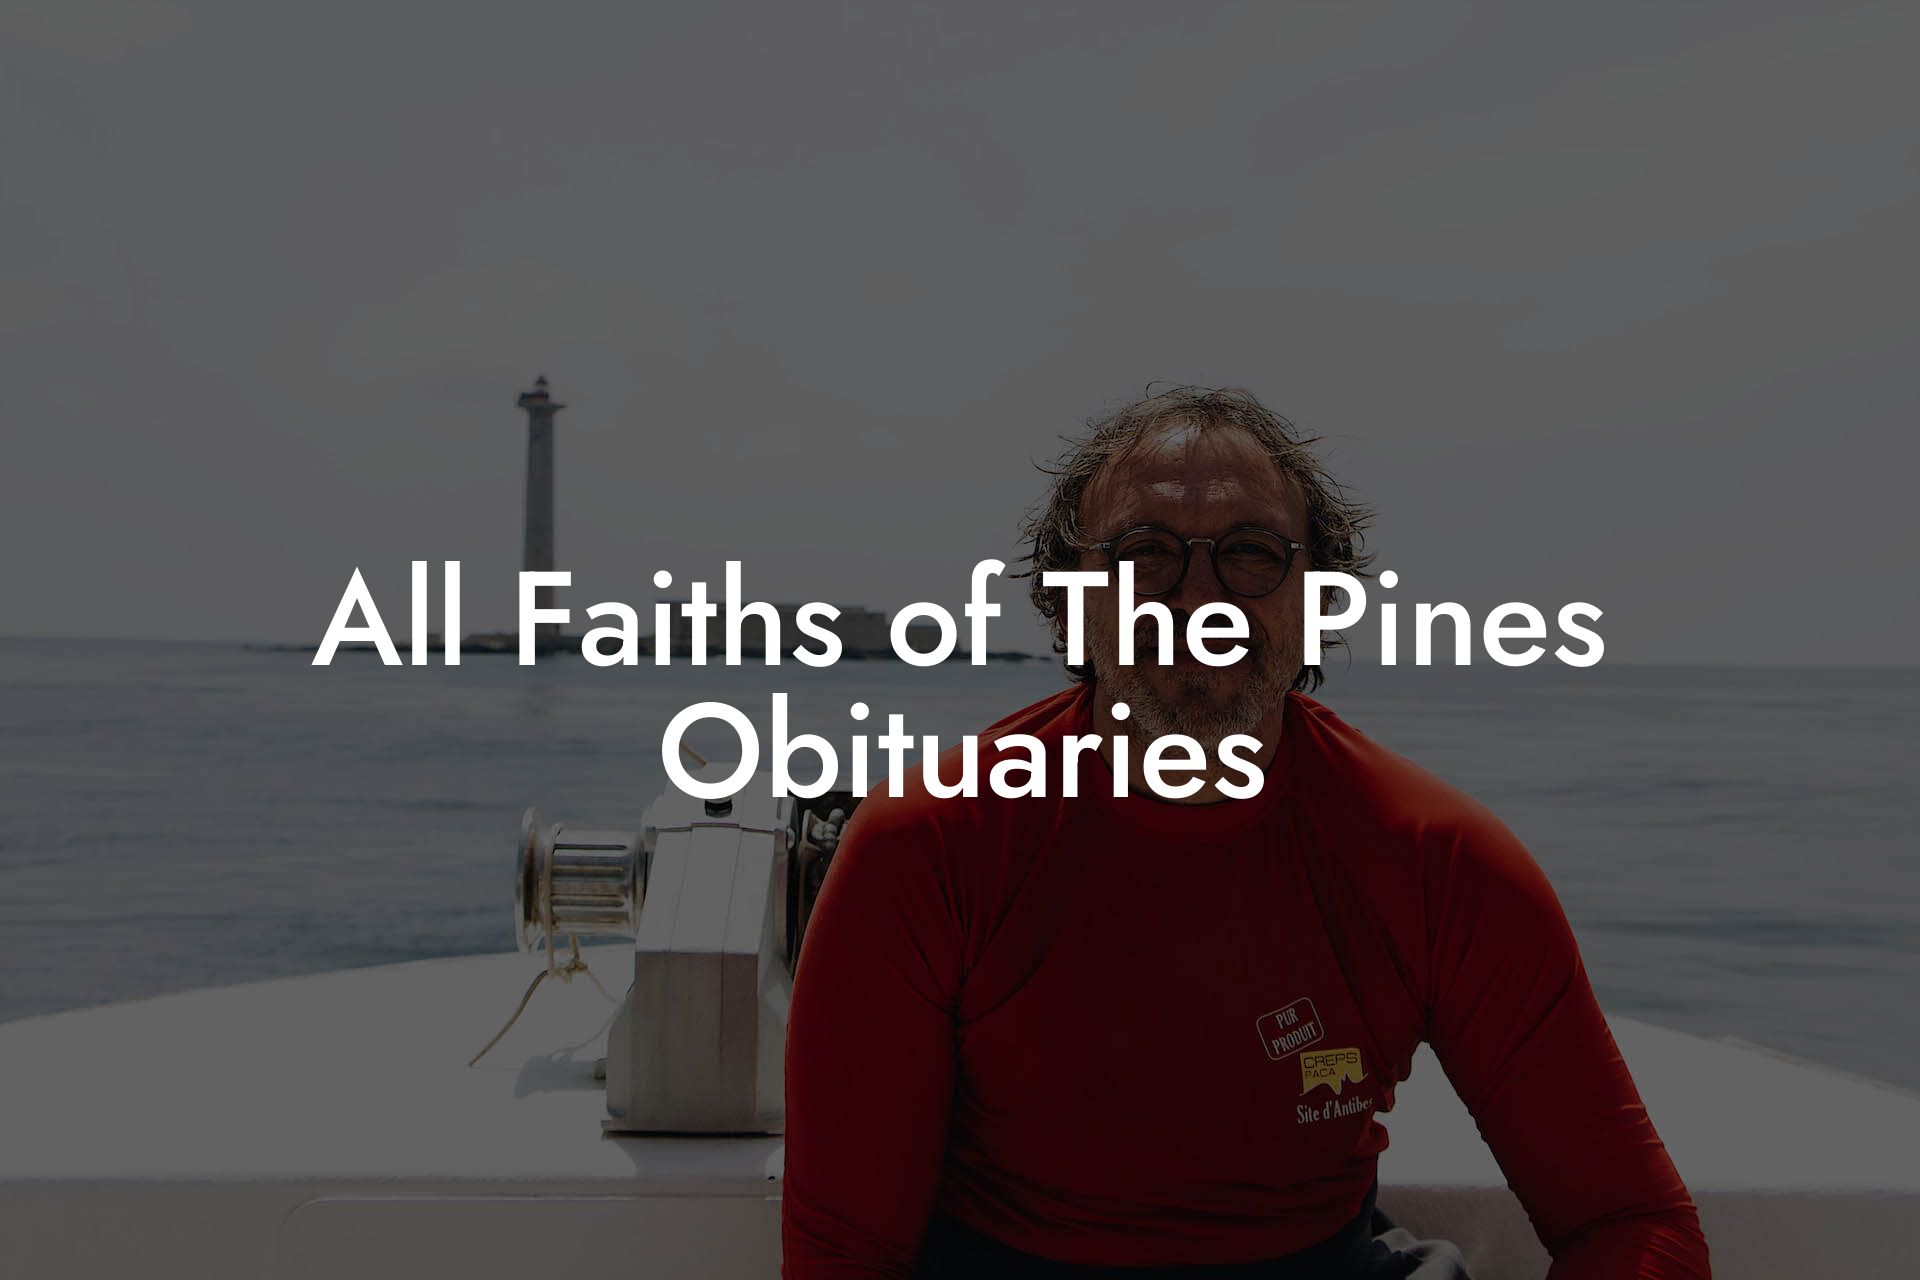 All Faiths of The Pines Obituaries